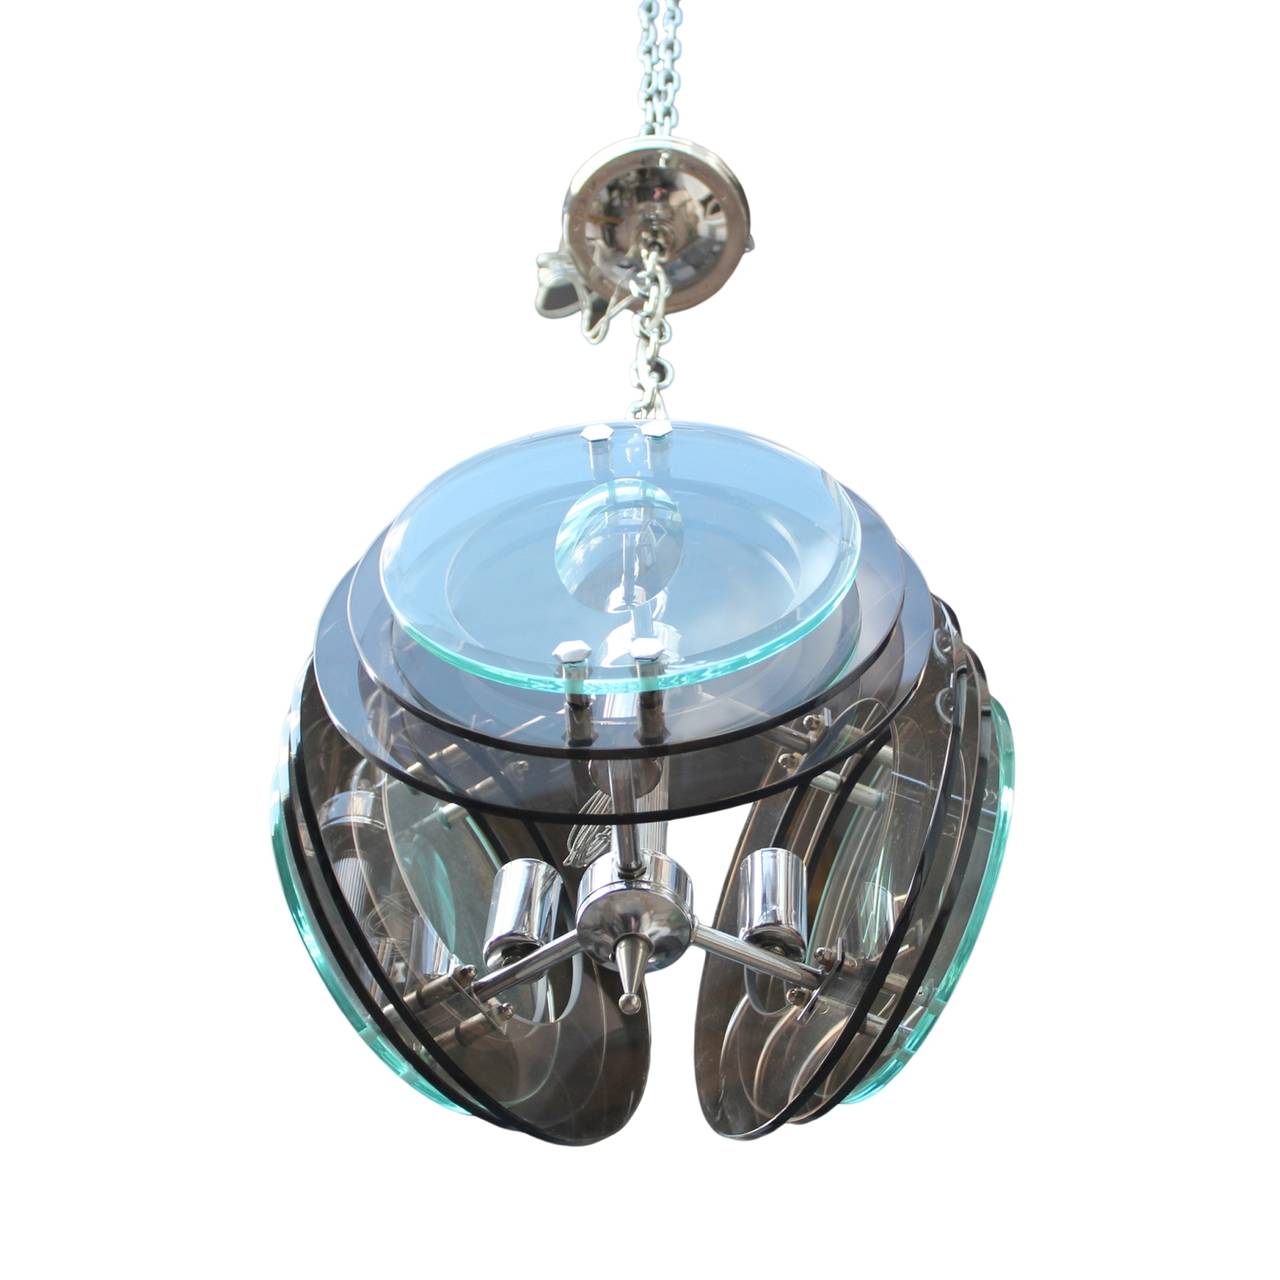 Etched Italian Modernist pendant lamp For Sale